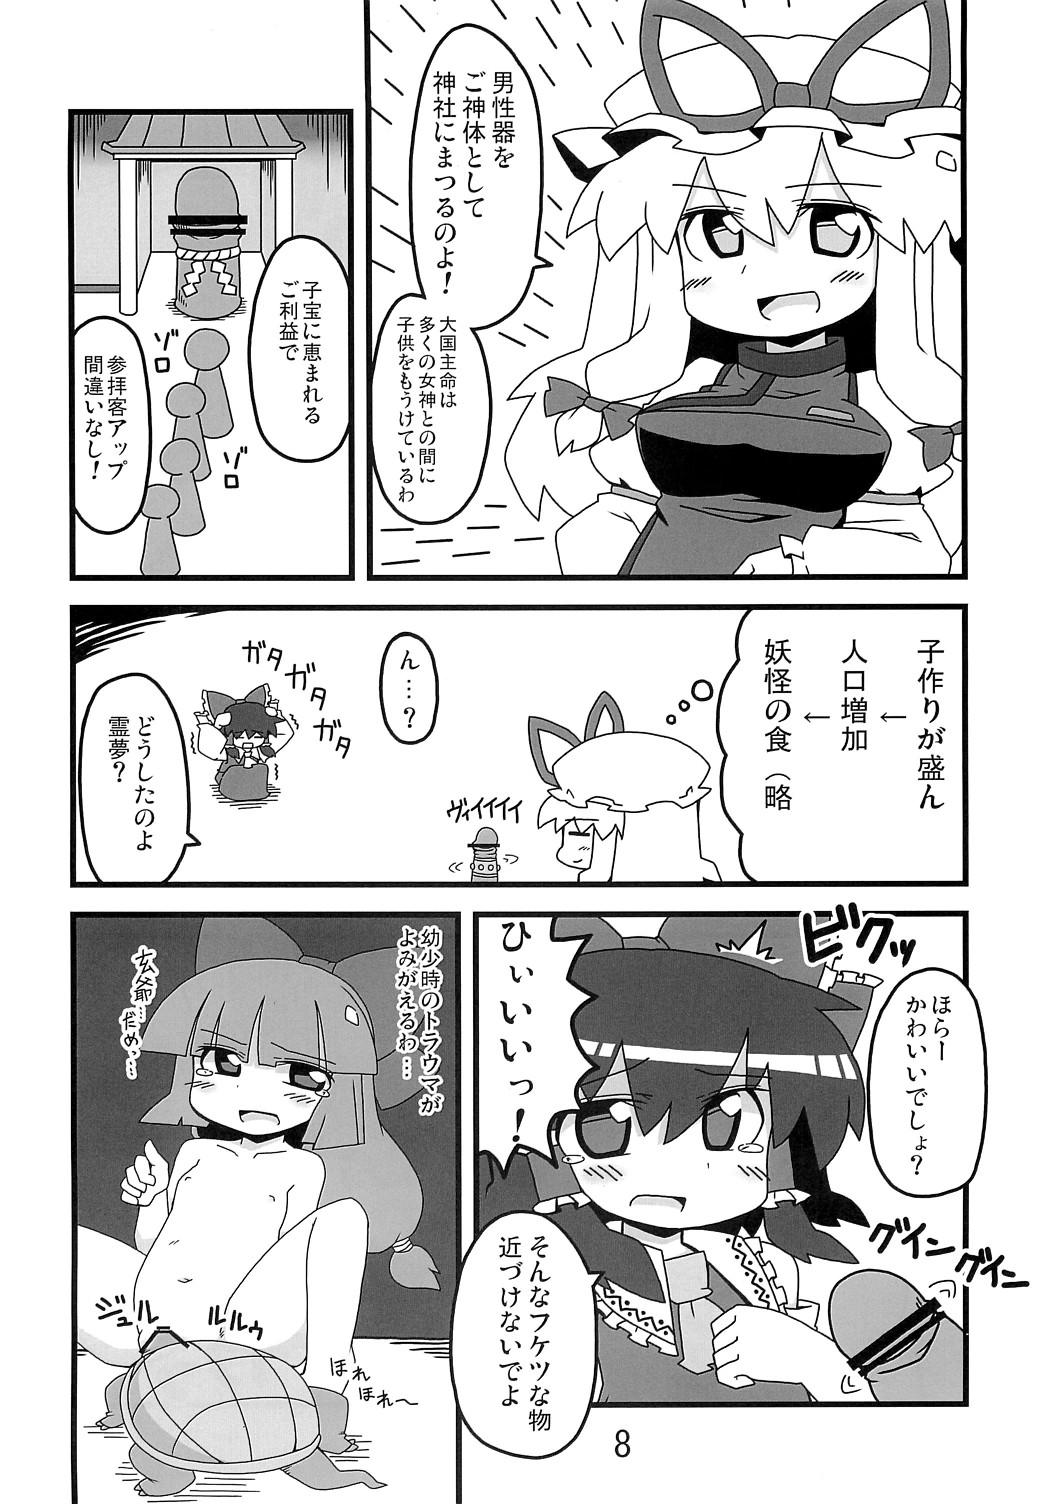 Affair 東方豊年祭 - Touhou project Titties - Page 7